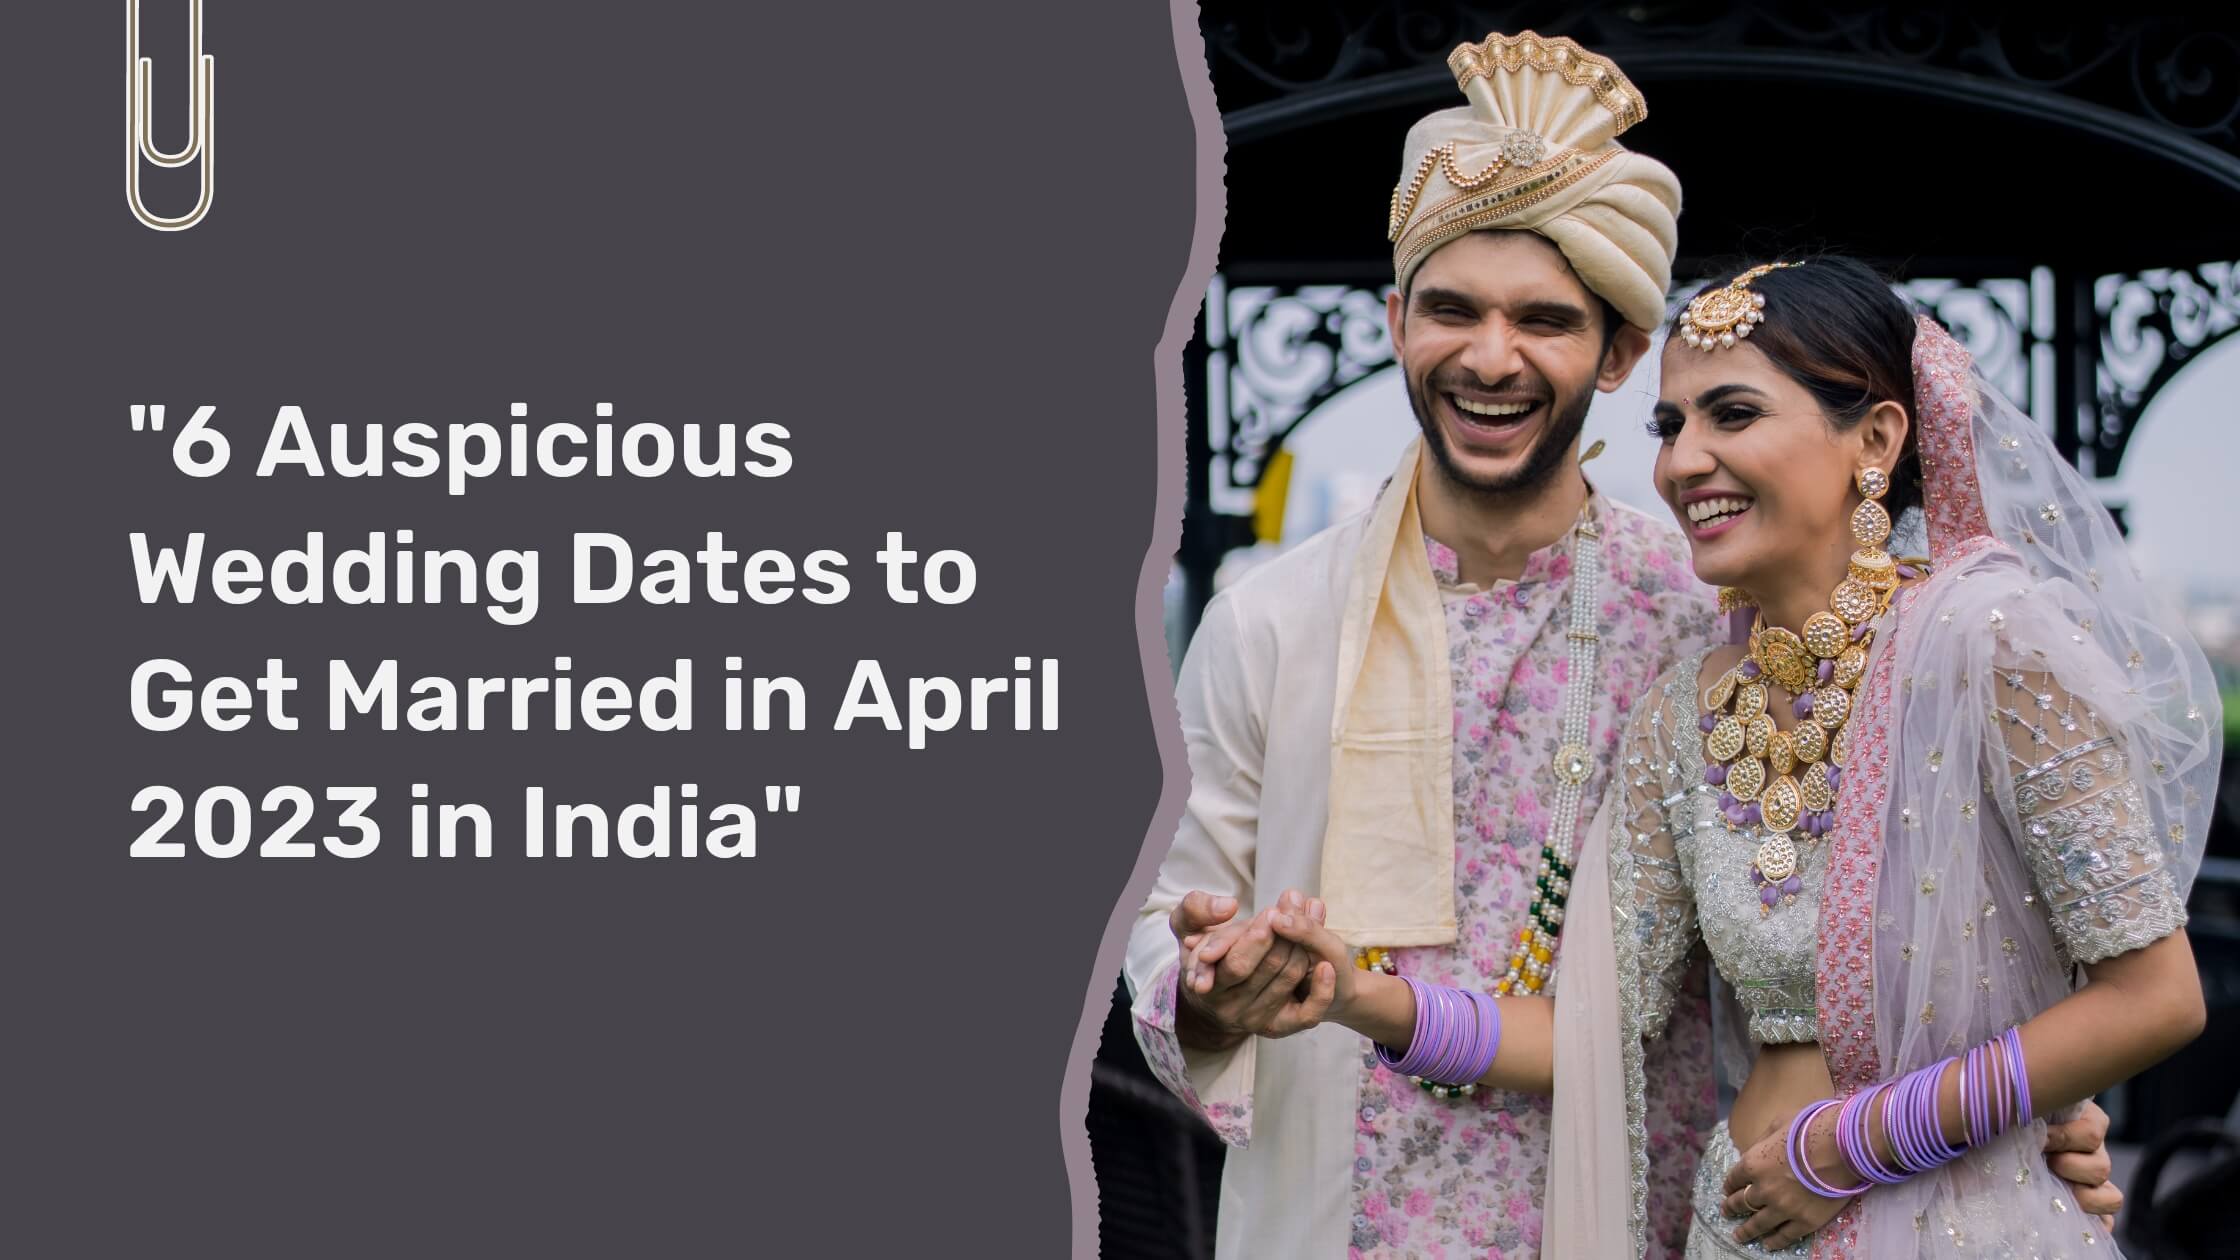 "6 Auspicious Wedding Dates to Get Married in April 2023 in India"